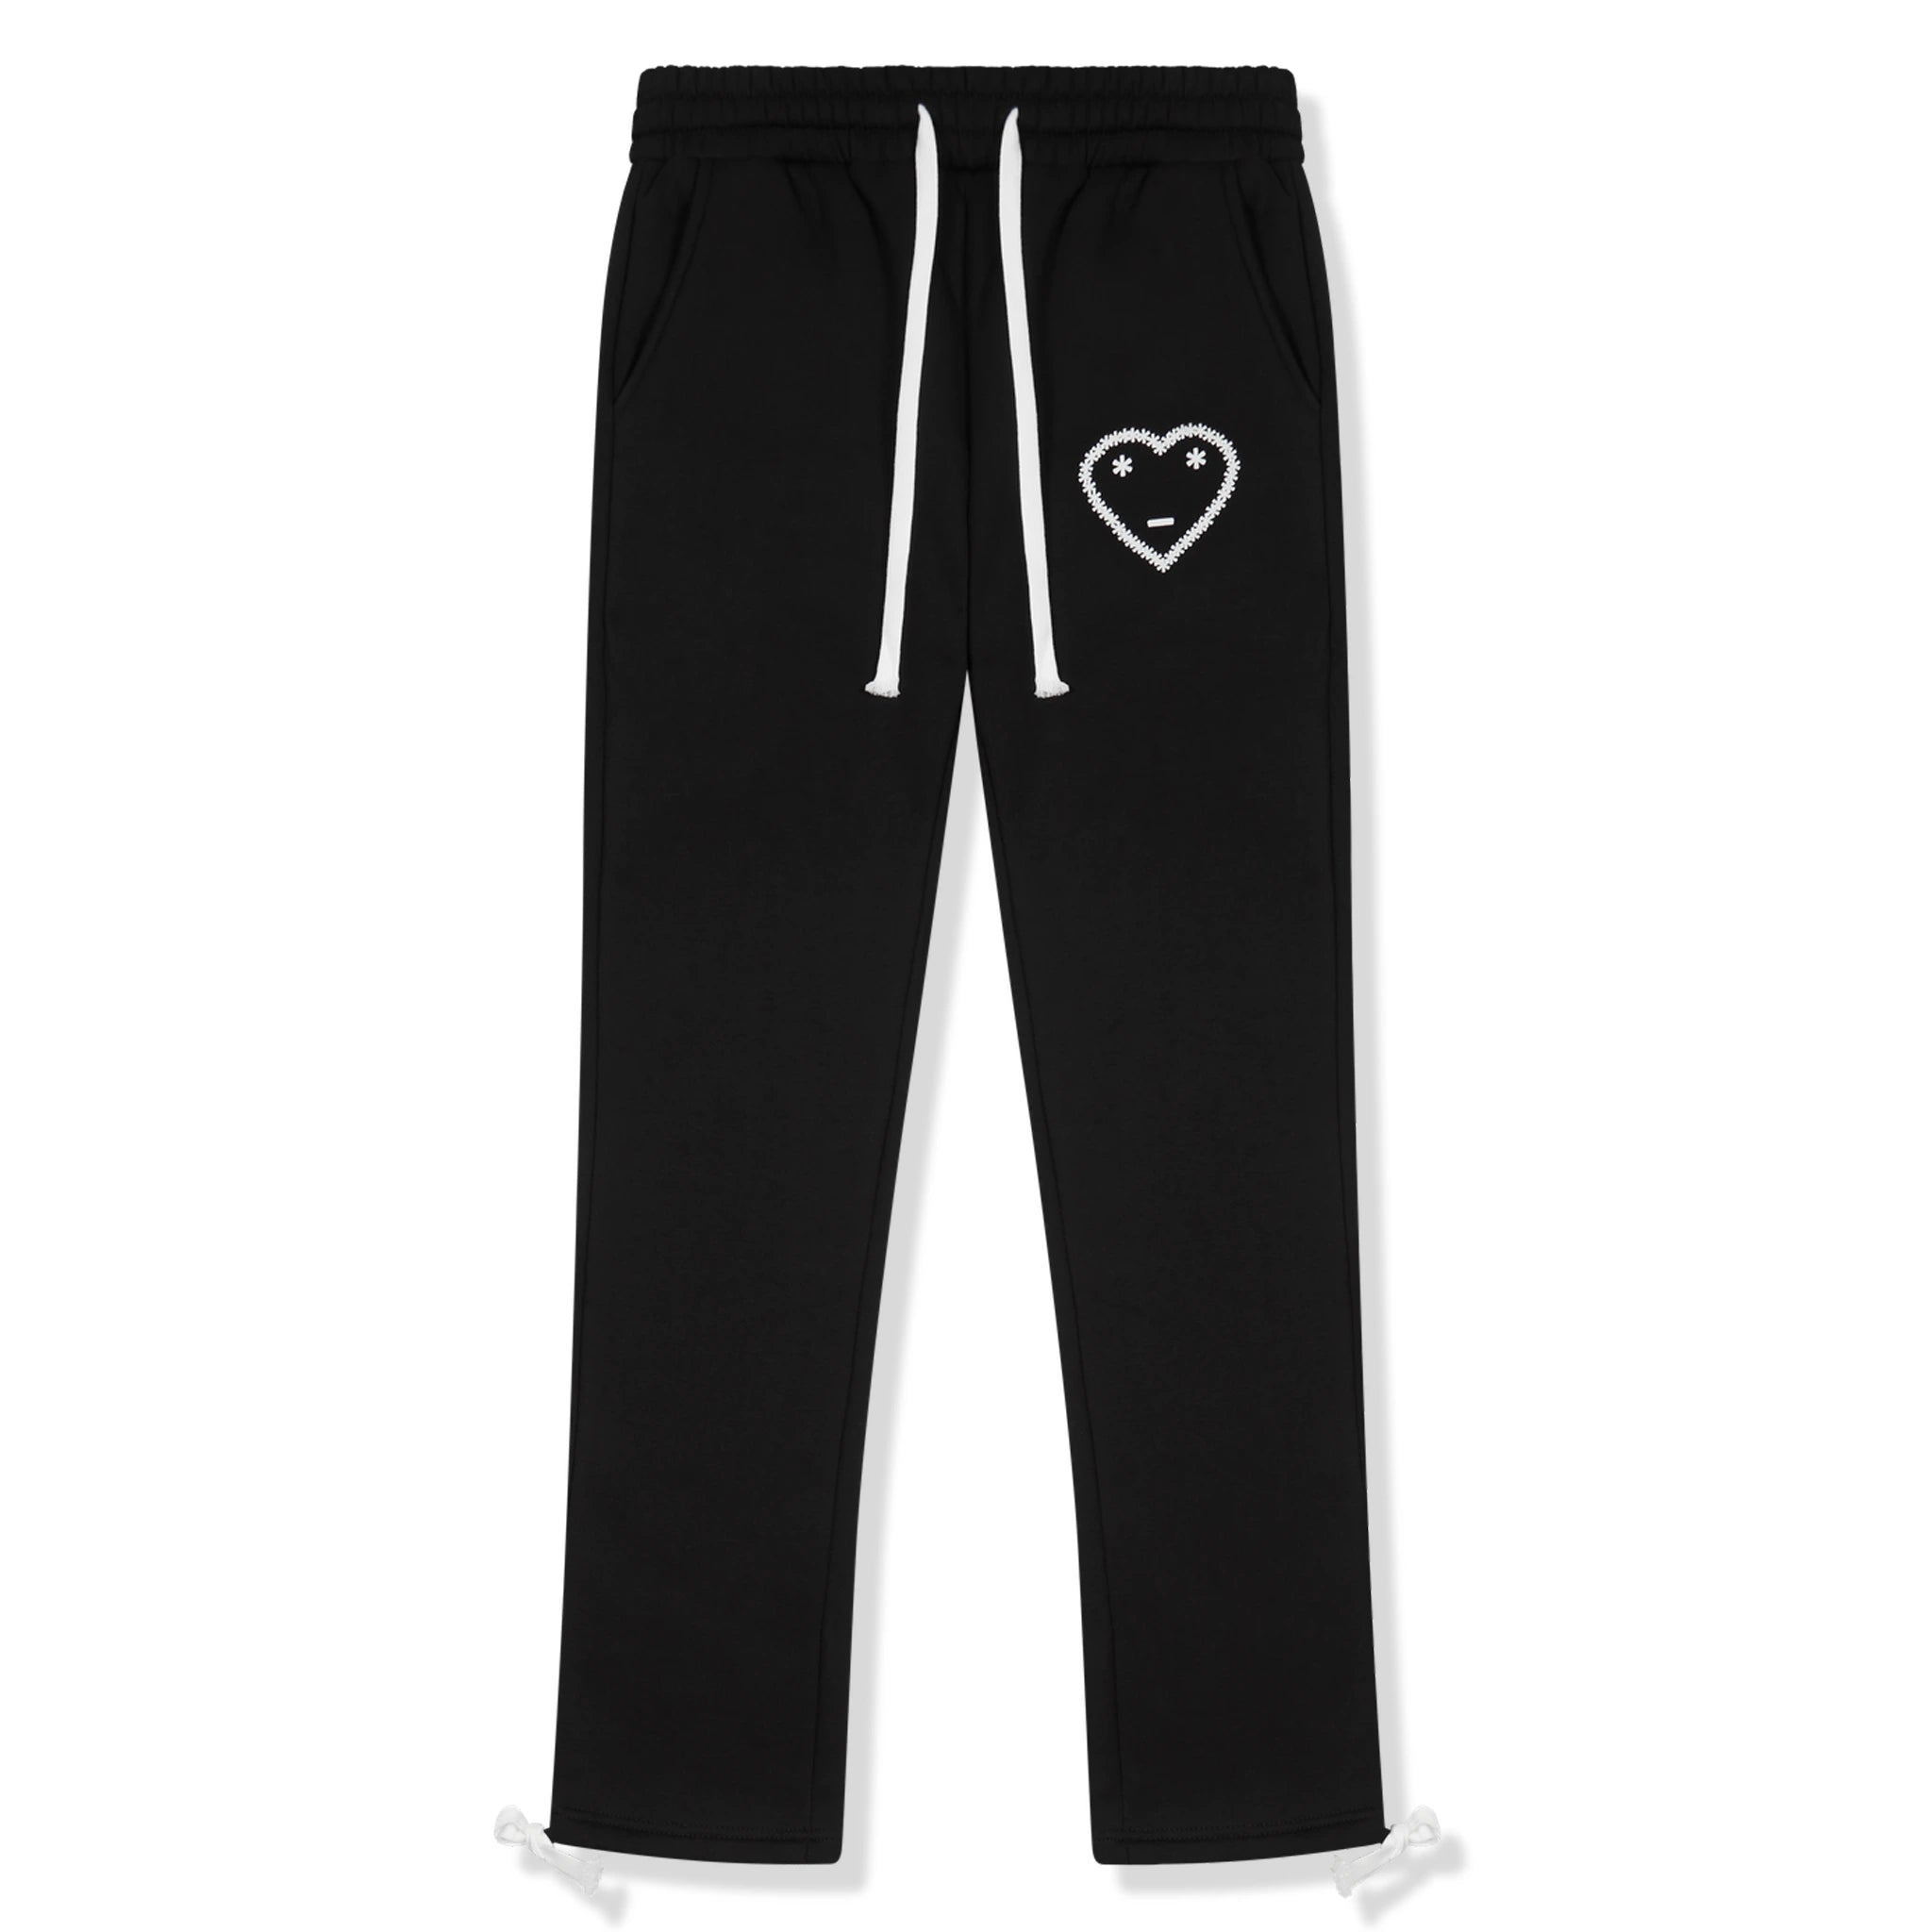 Front view of Carsicko Signature Black Track Pants